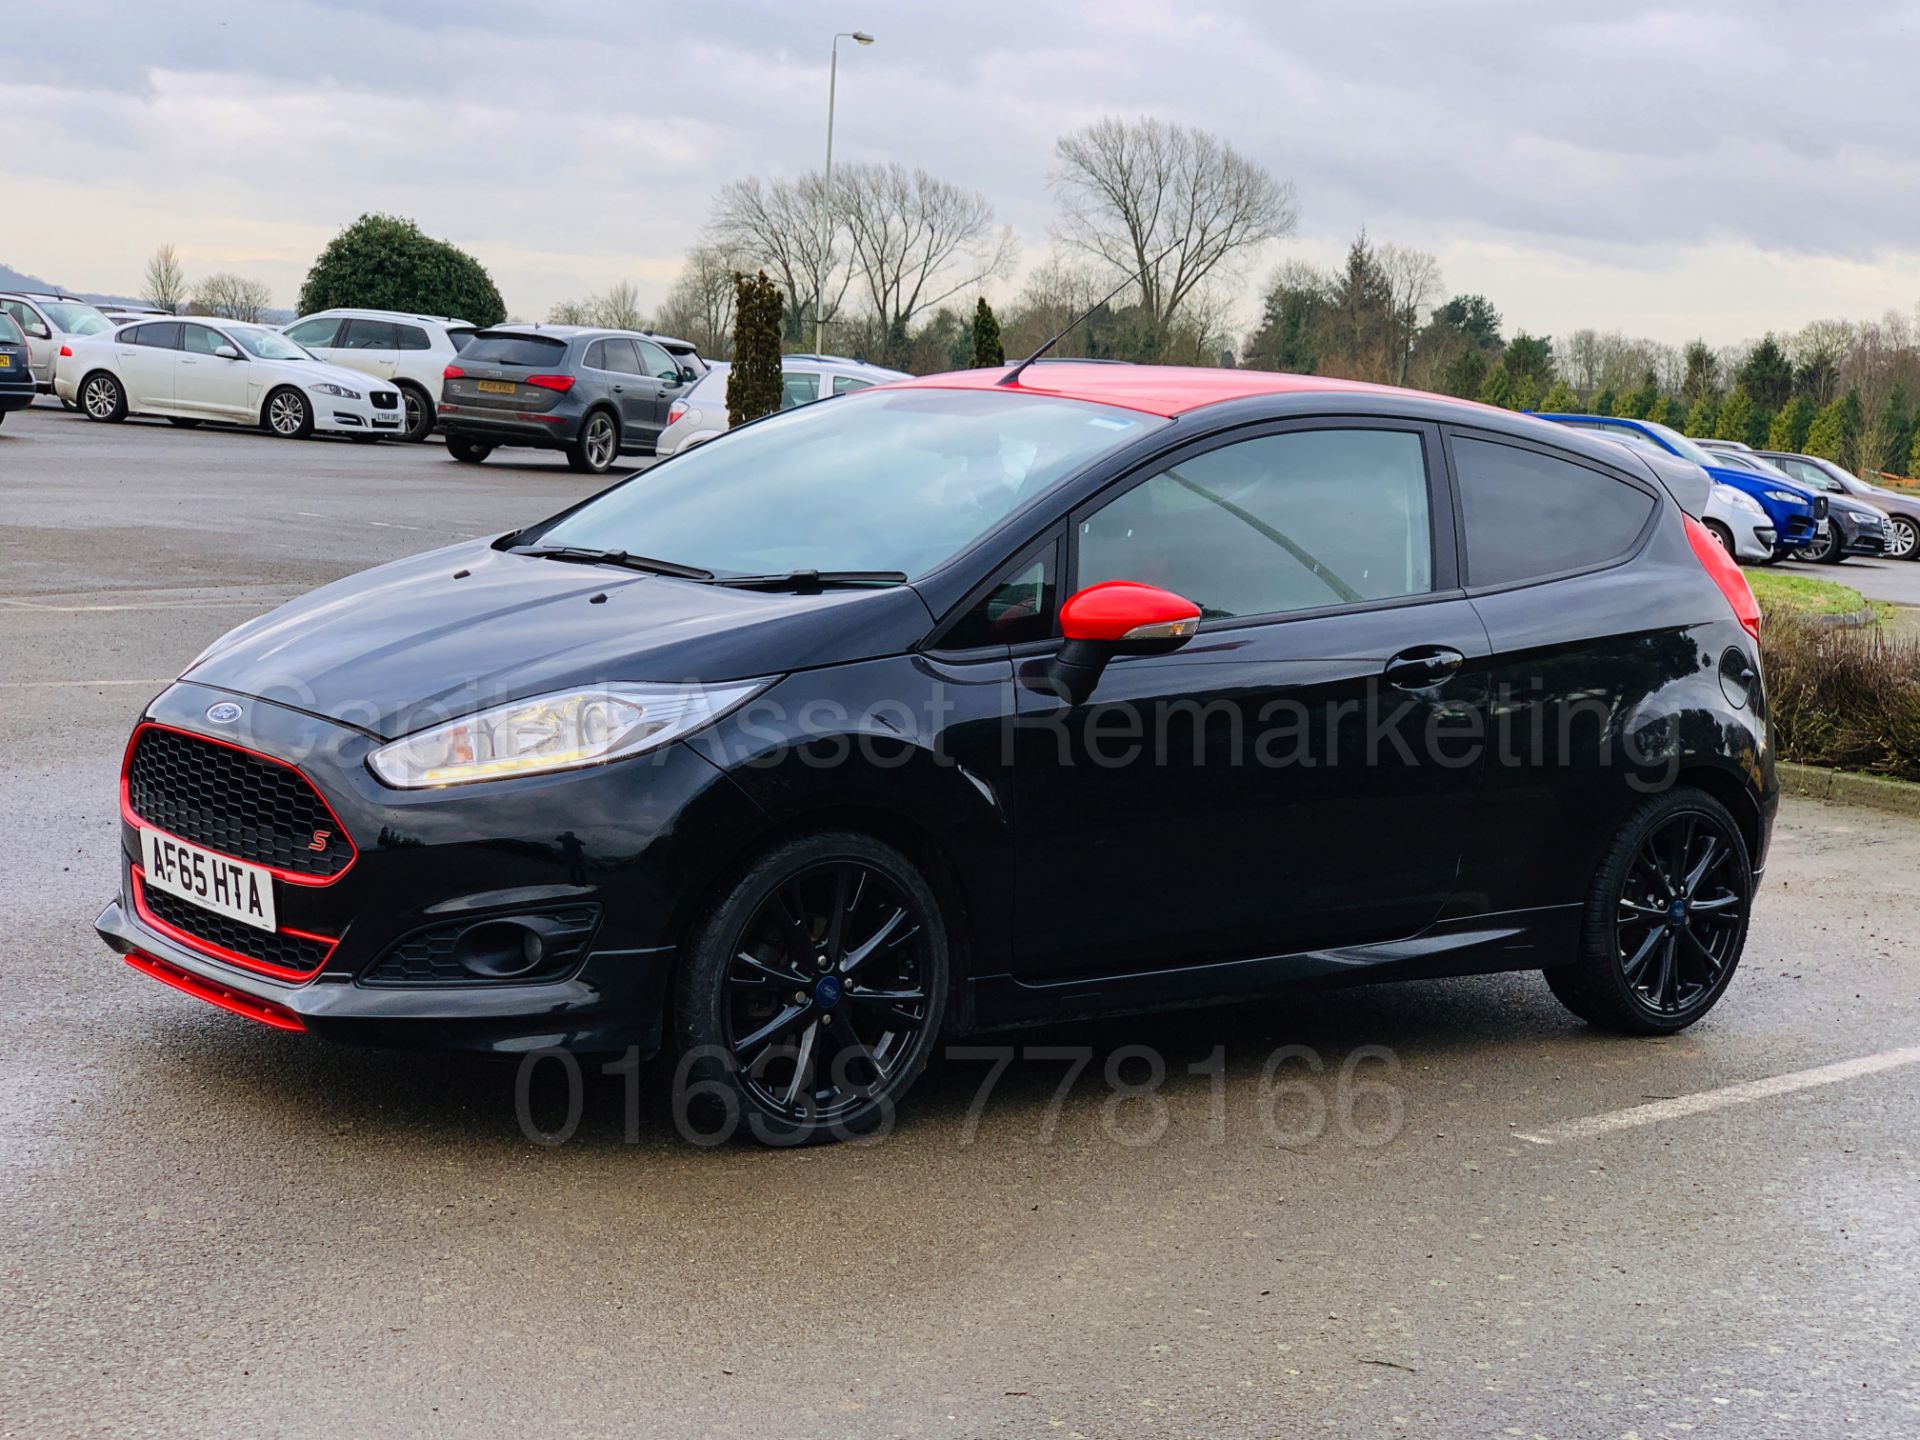 (On Sale) FORD FIESTA *ZETEC S - BLACK EDITION* (2016 MODEL) '1.0L ECO-BOOST - 140 BHP' - Image 5 of 45